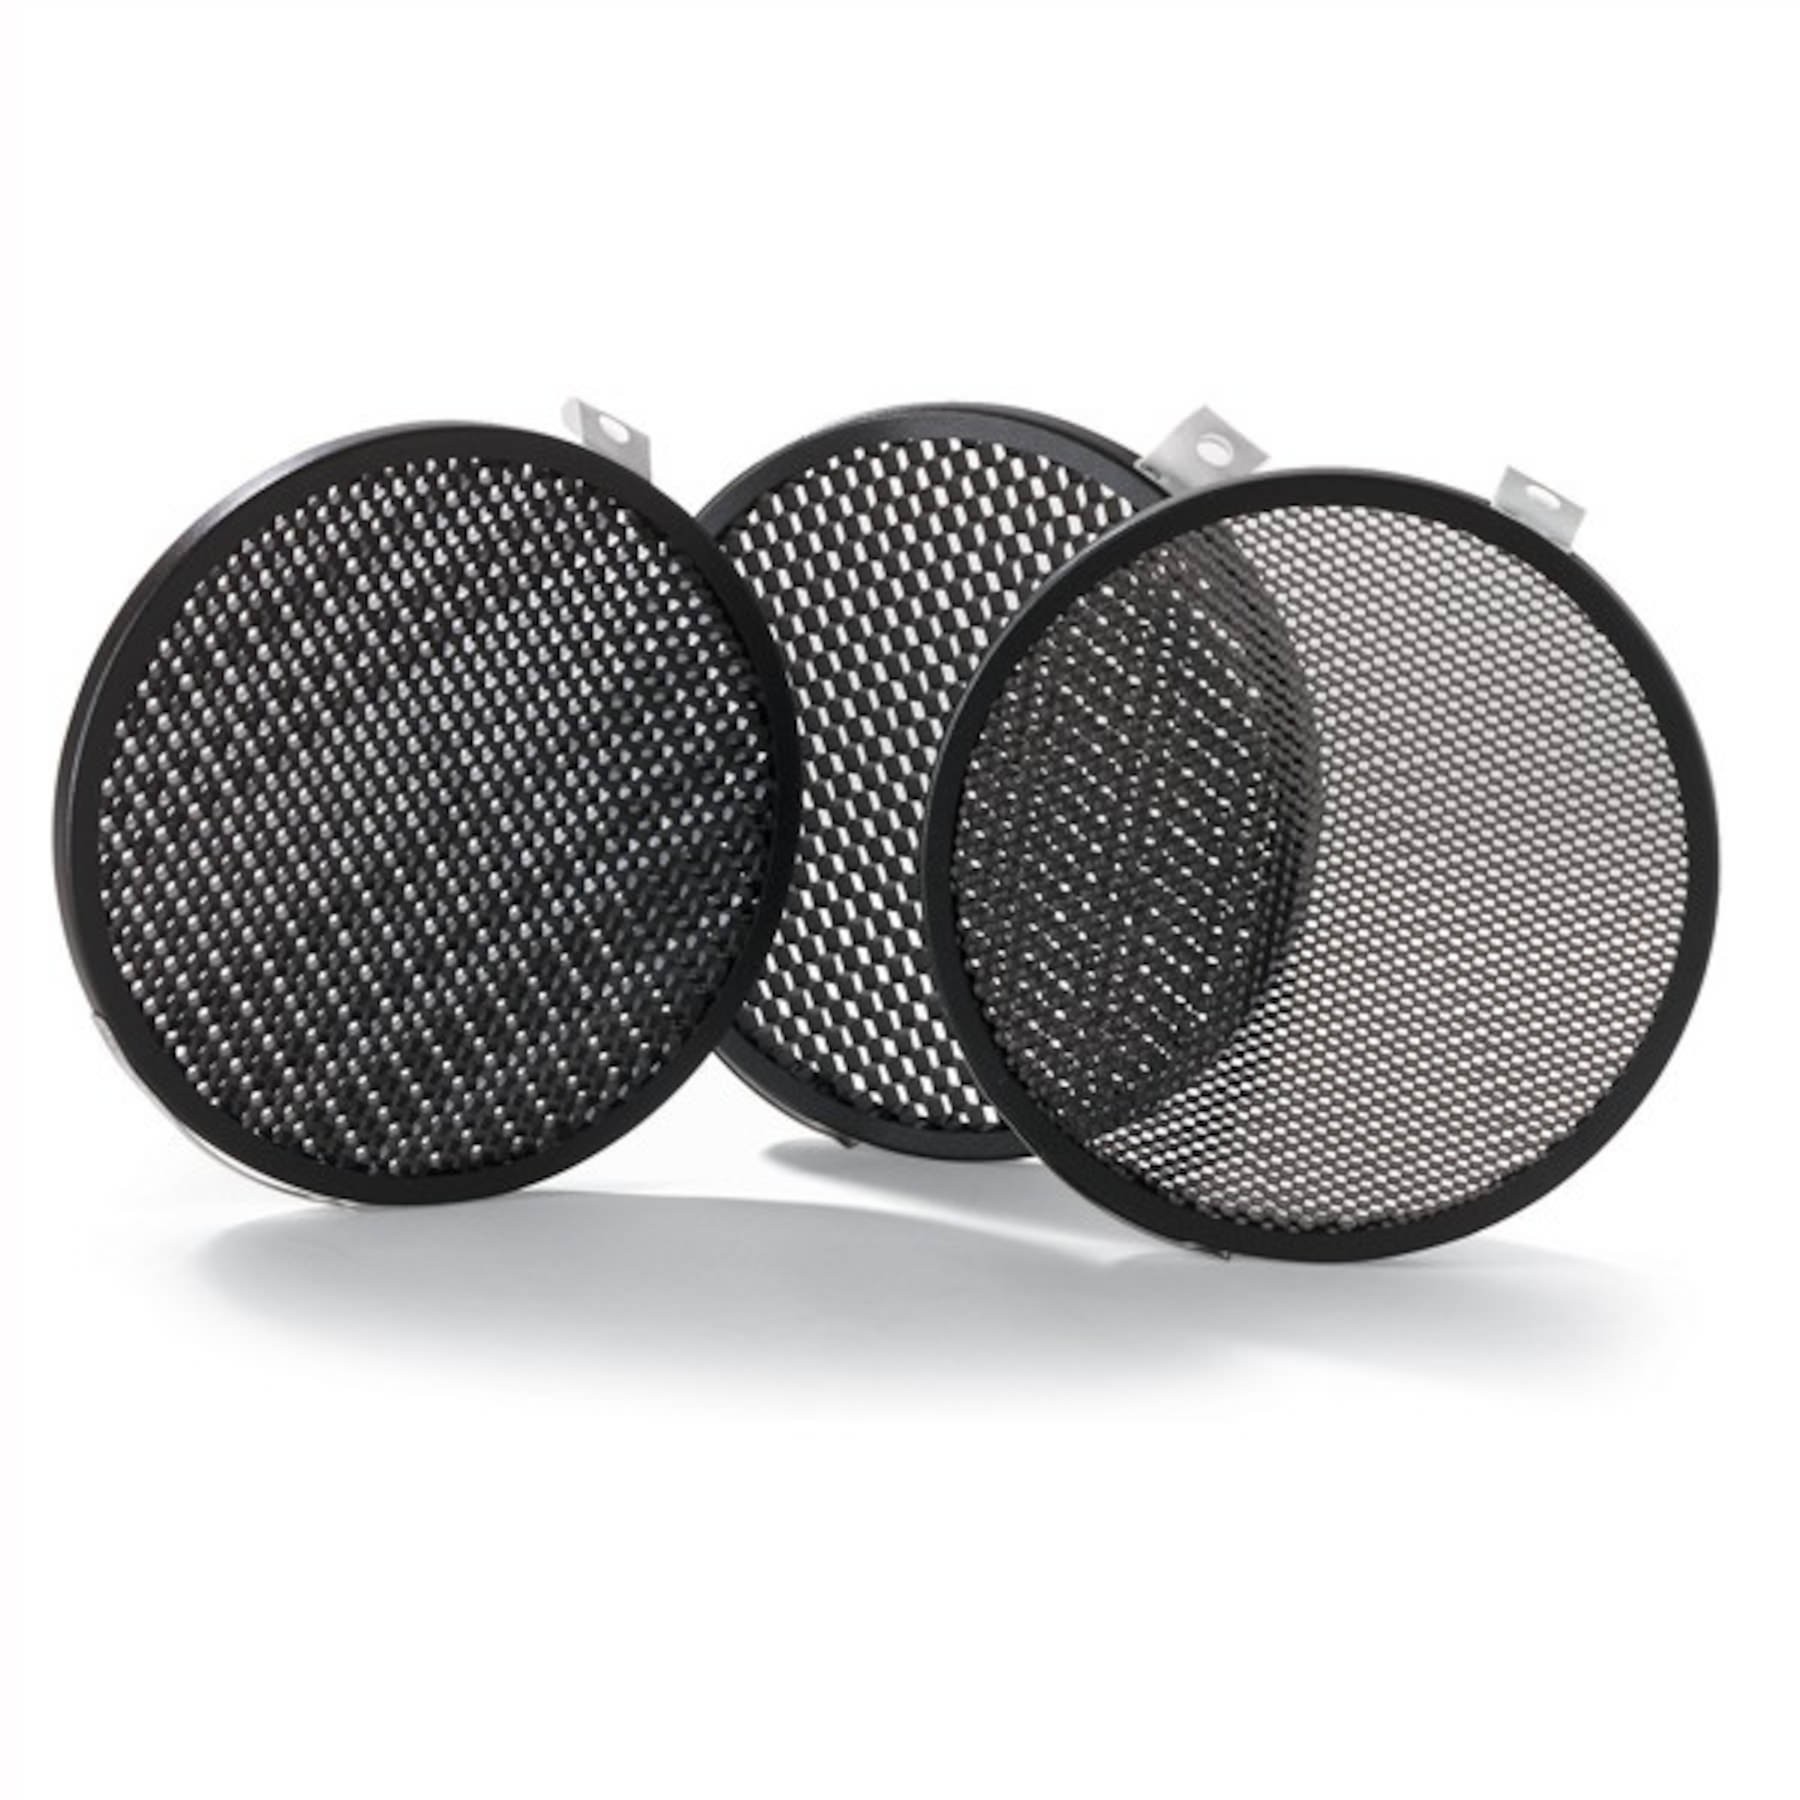 Bowens Set of Grids for Grid Reflector